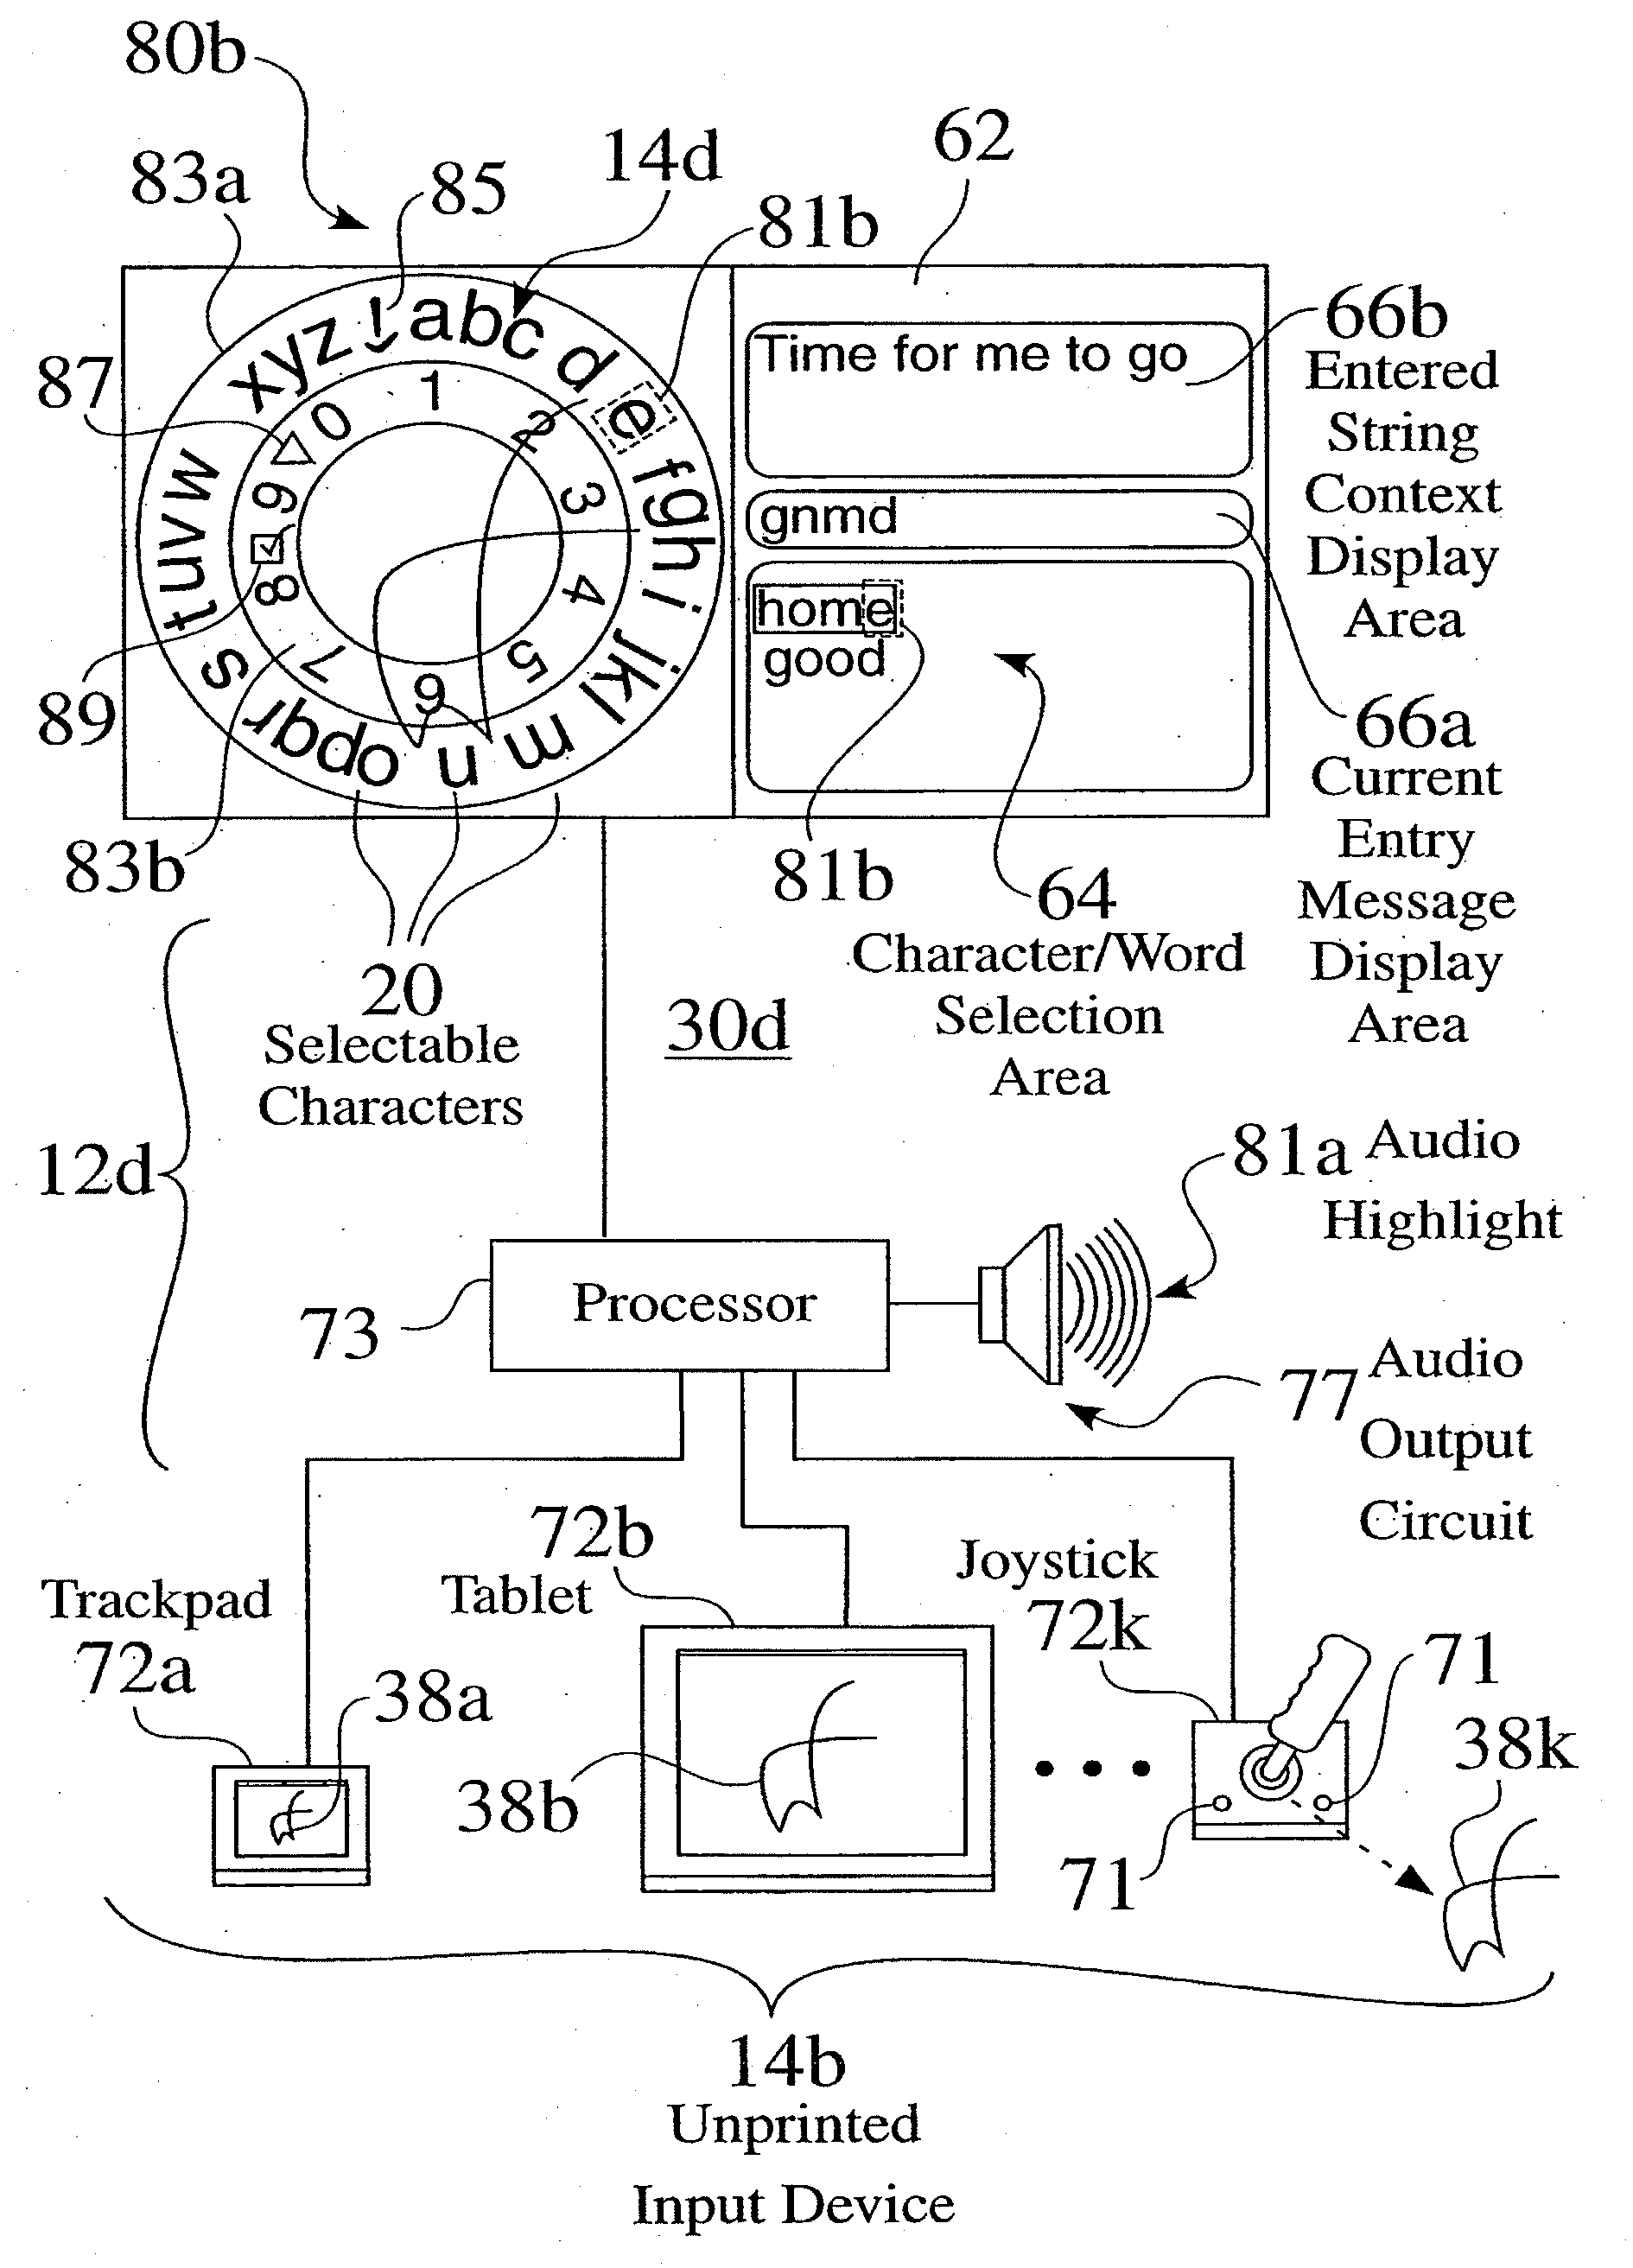 Touch screen and graphical user interface